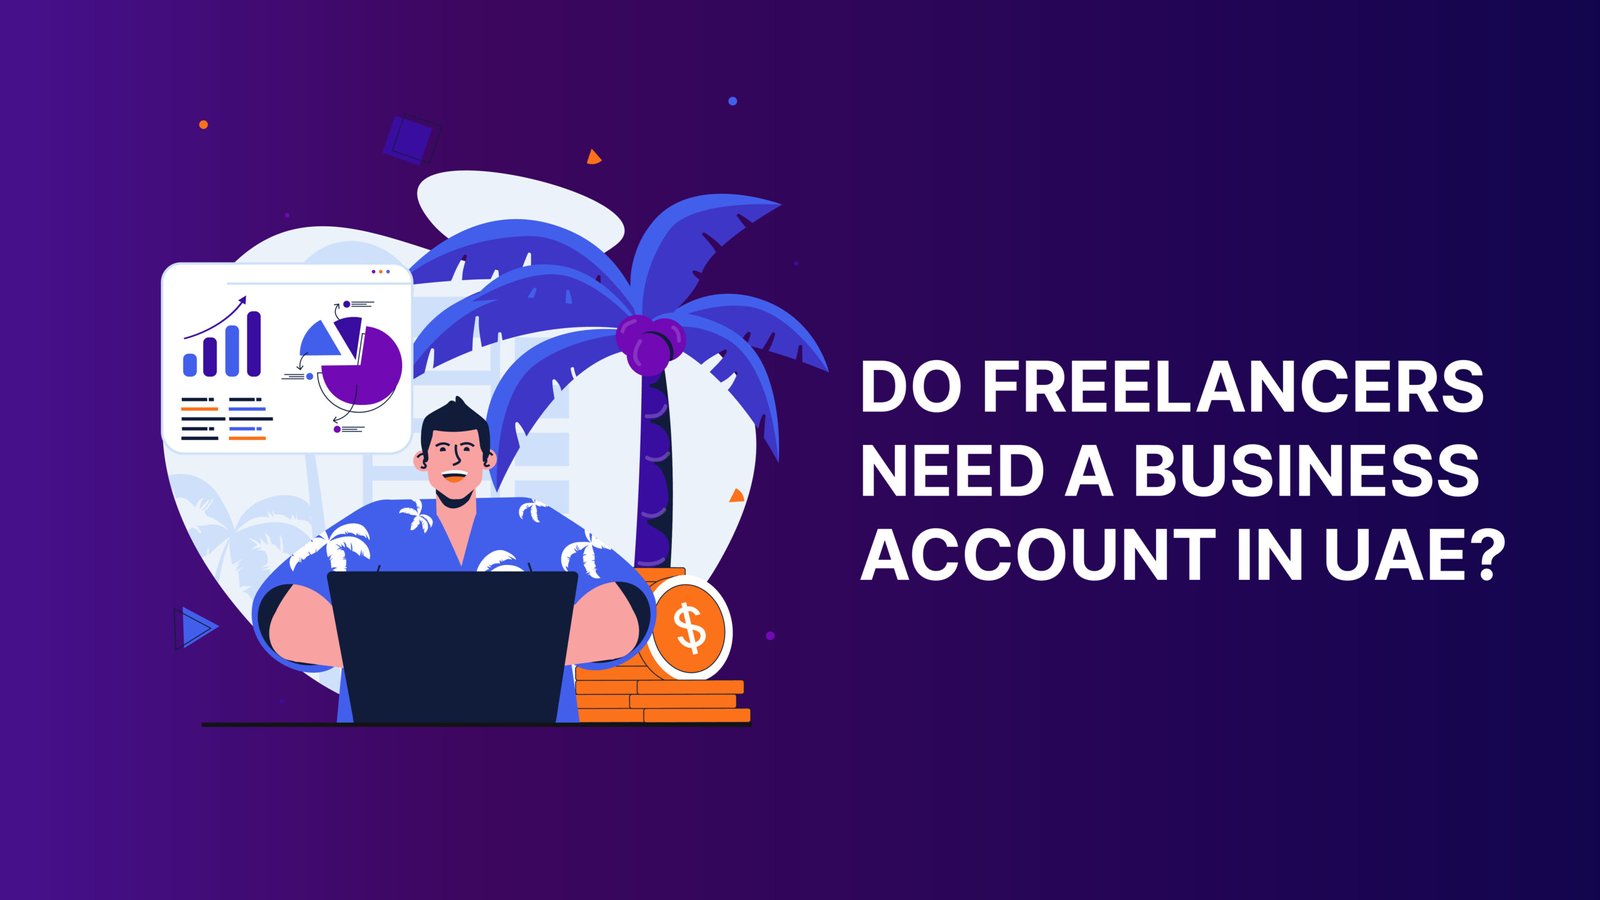 Do freelancers need a business account in the UAE?